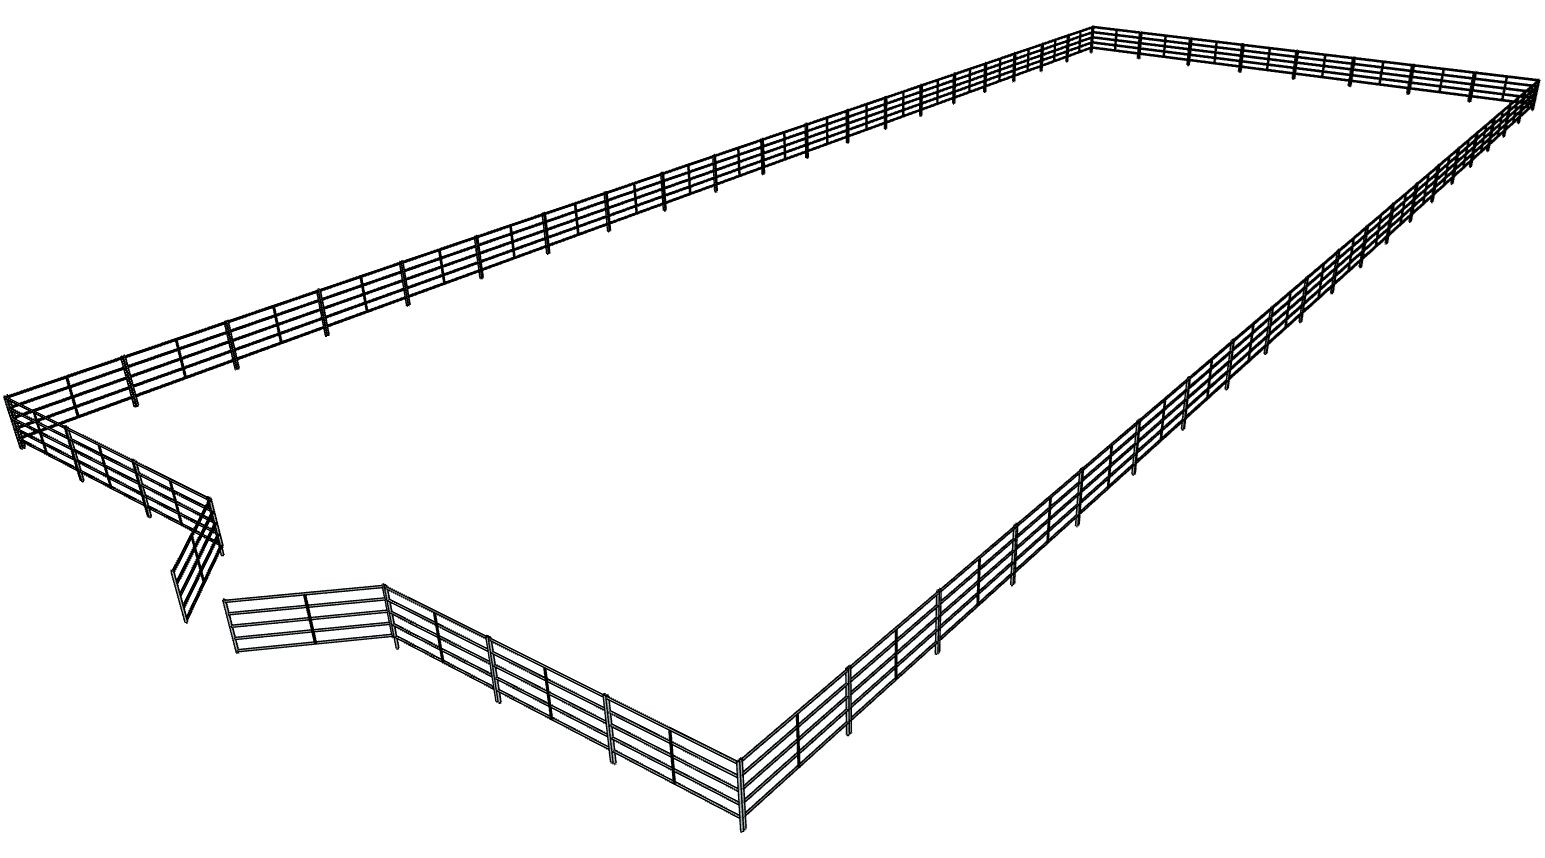 Galvanized 80 Foot by 200 Foot 5-Rail Riding Arena